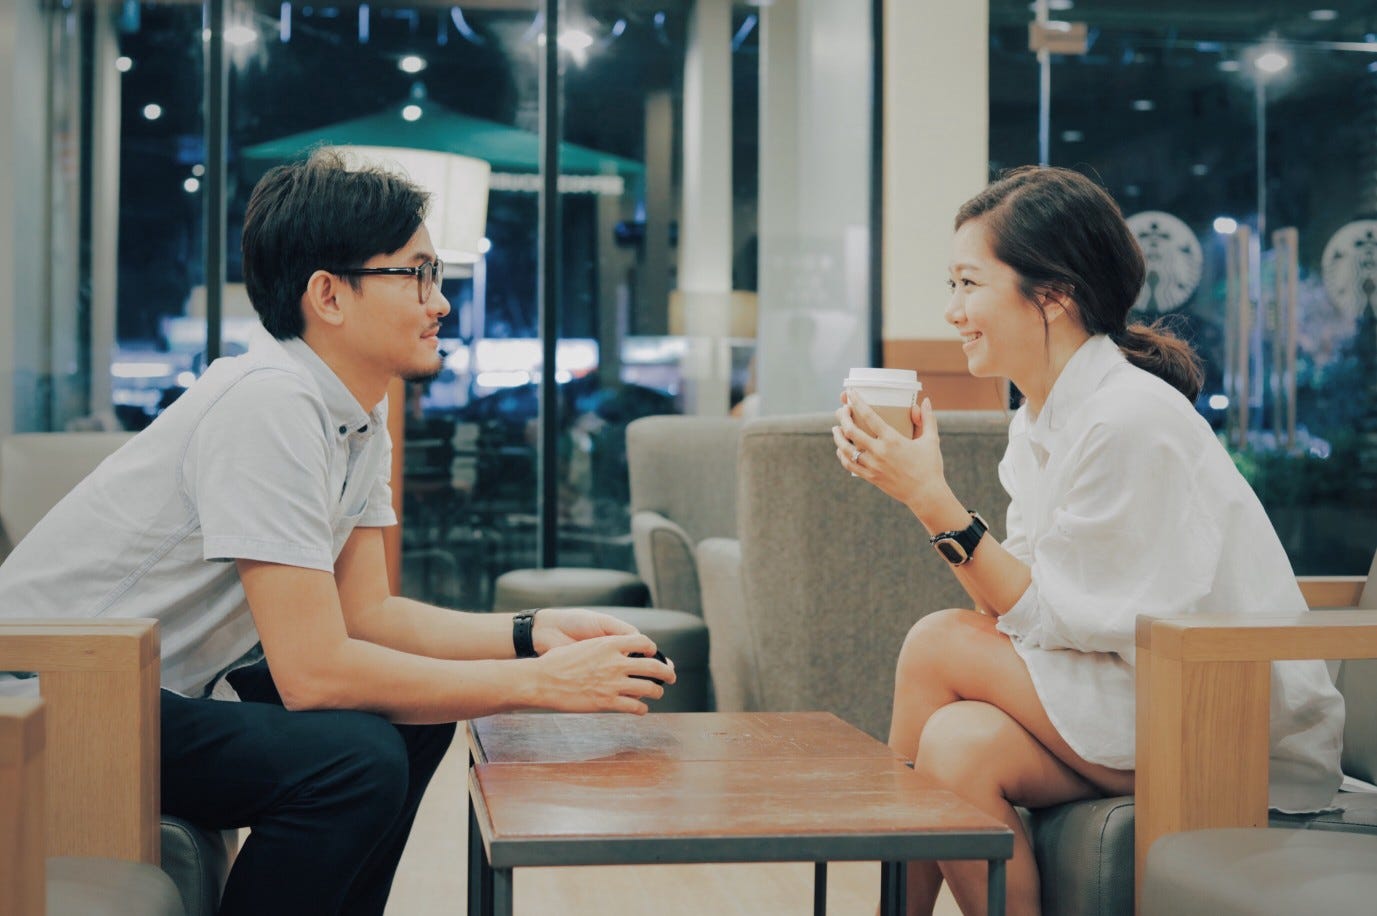 A young couple chat together in a coffee shop on their first date.